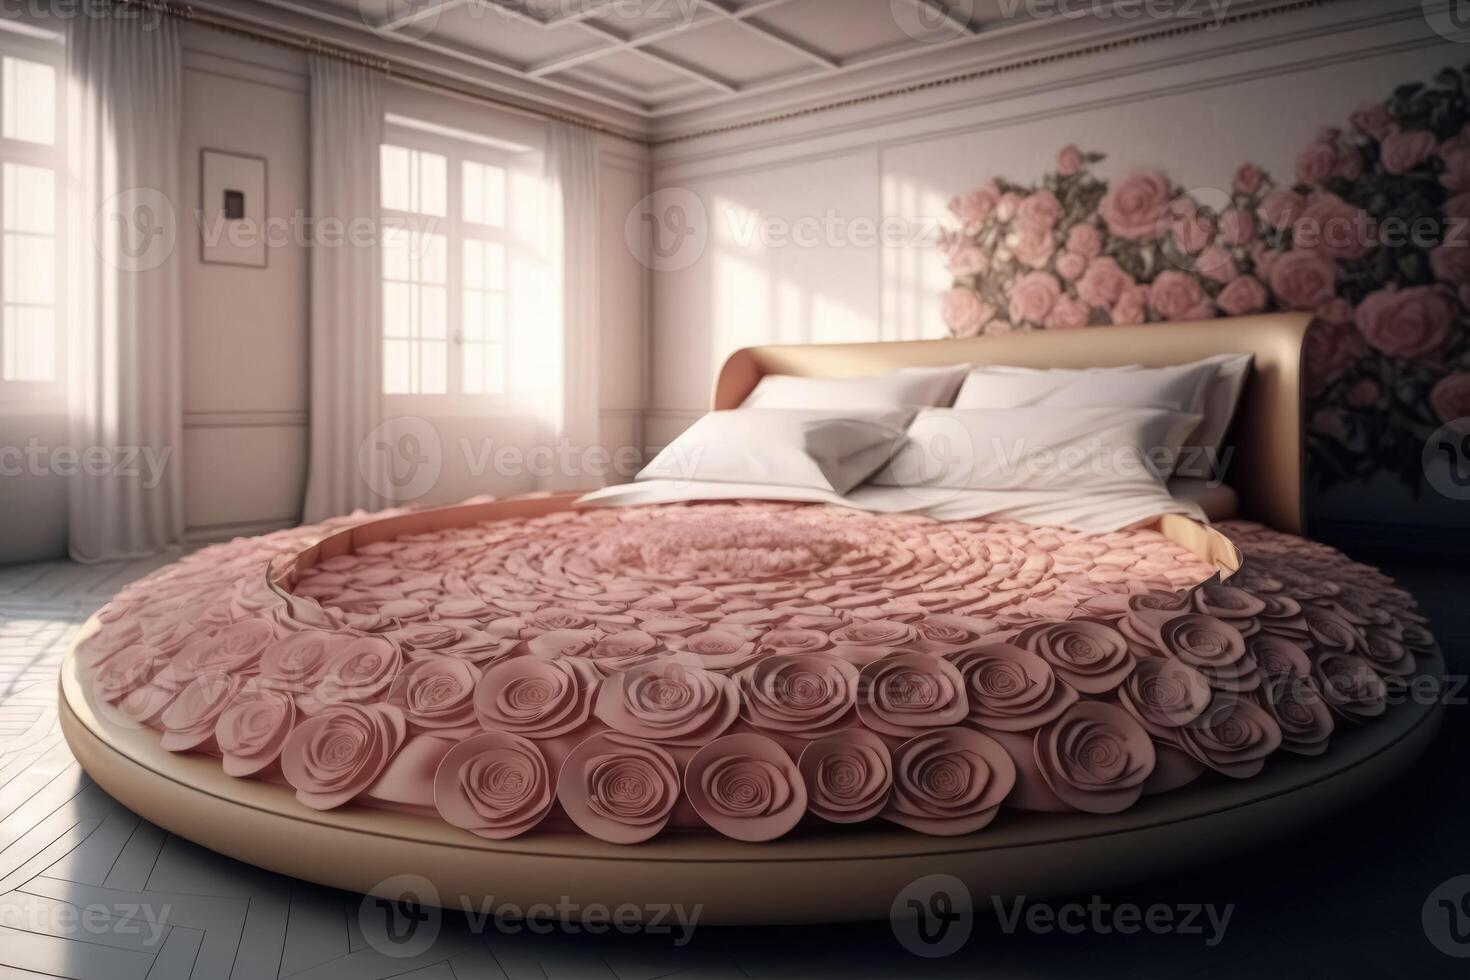 A king size bed made completely of roses created with technology. photo